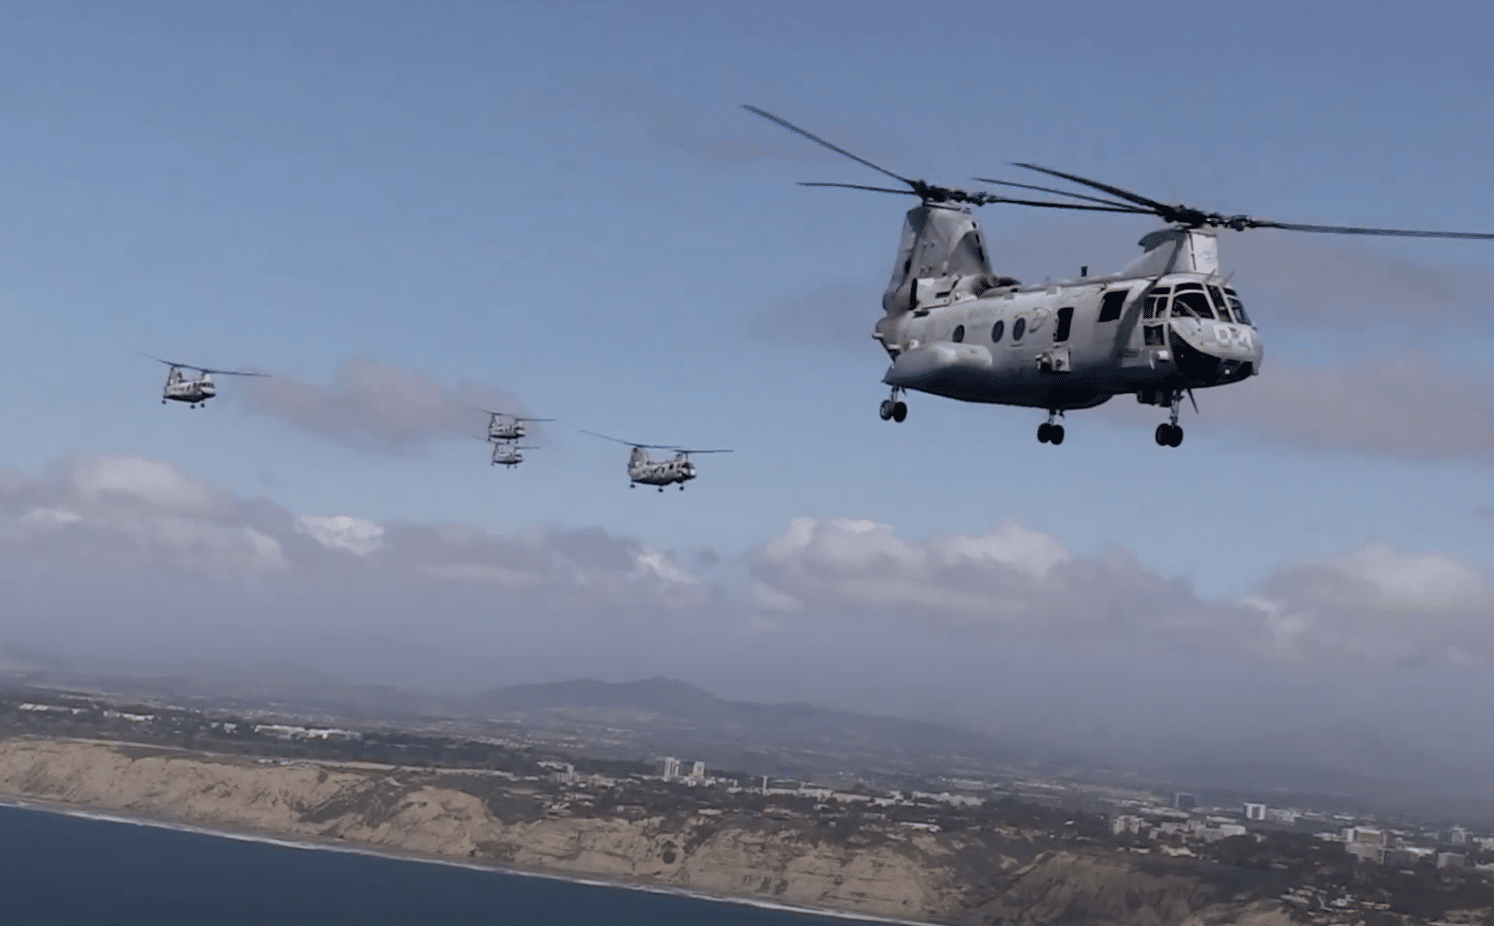 Watch Iconic Us Marine Ch 46 Sea Knight Helicopter Takes Last Flight